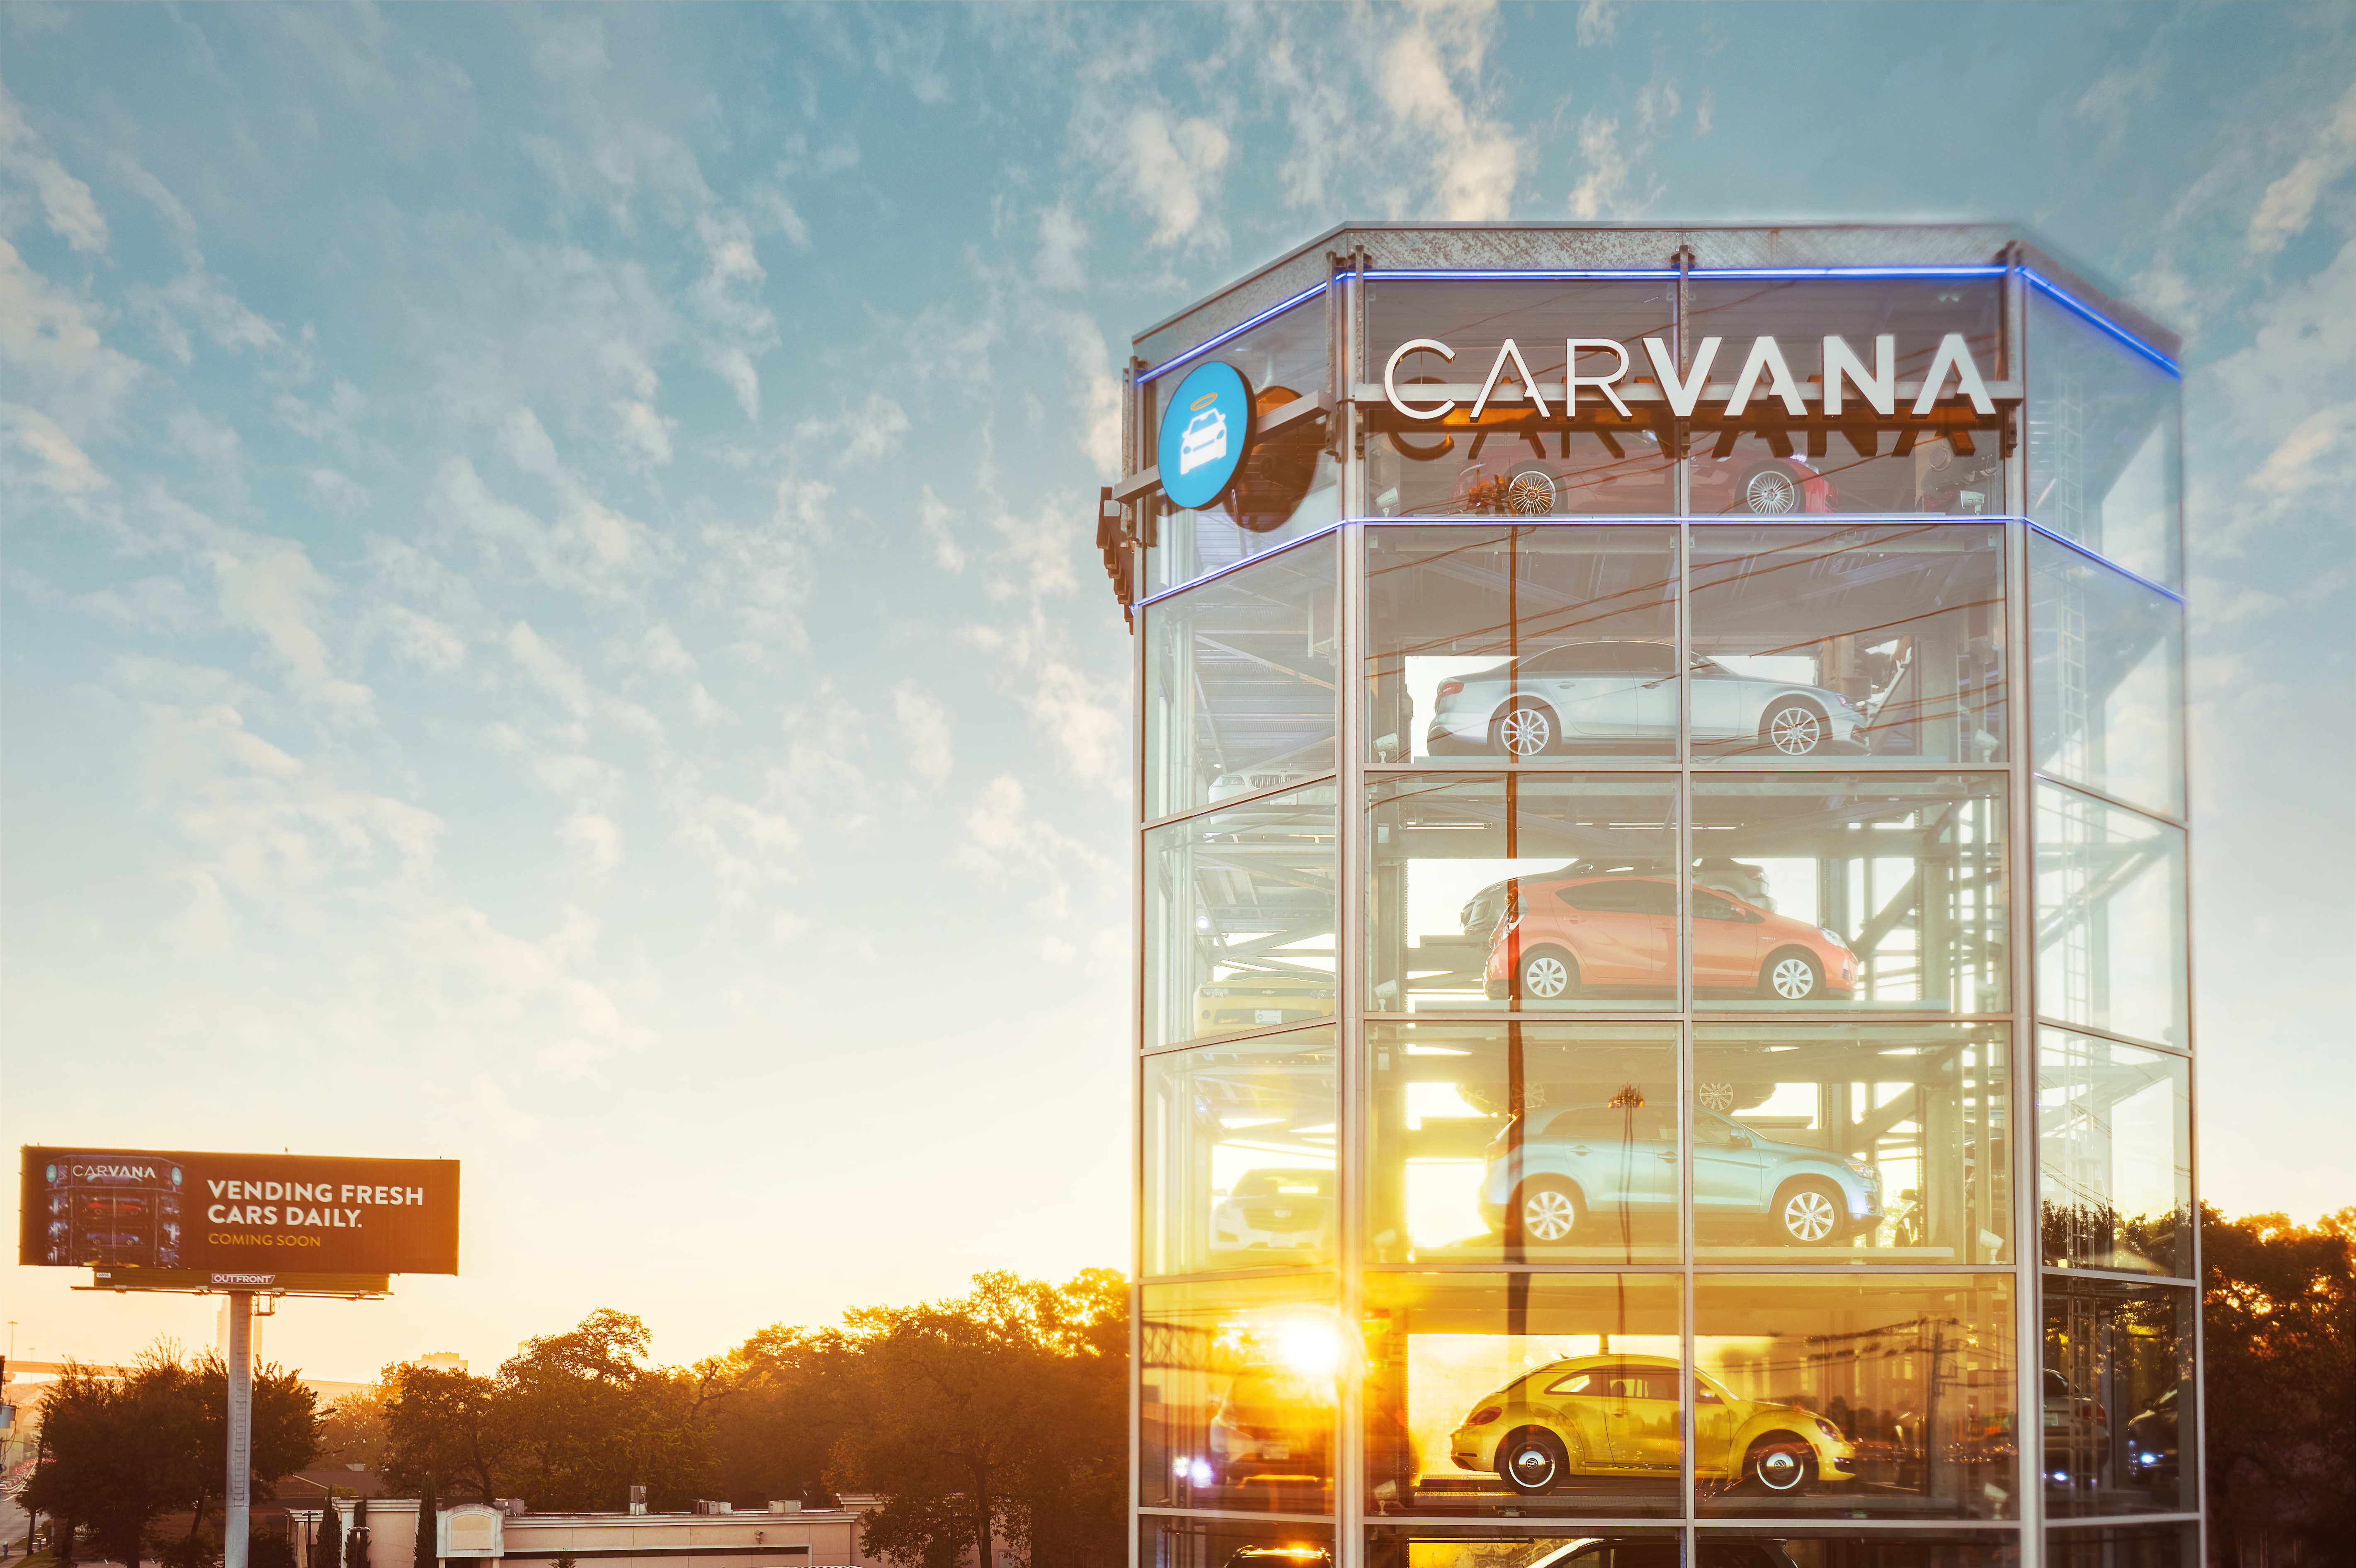 Carvana Opens the Nation’s Largest CoinOperated Car Vending Machine in